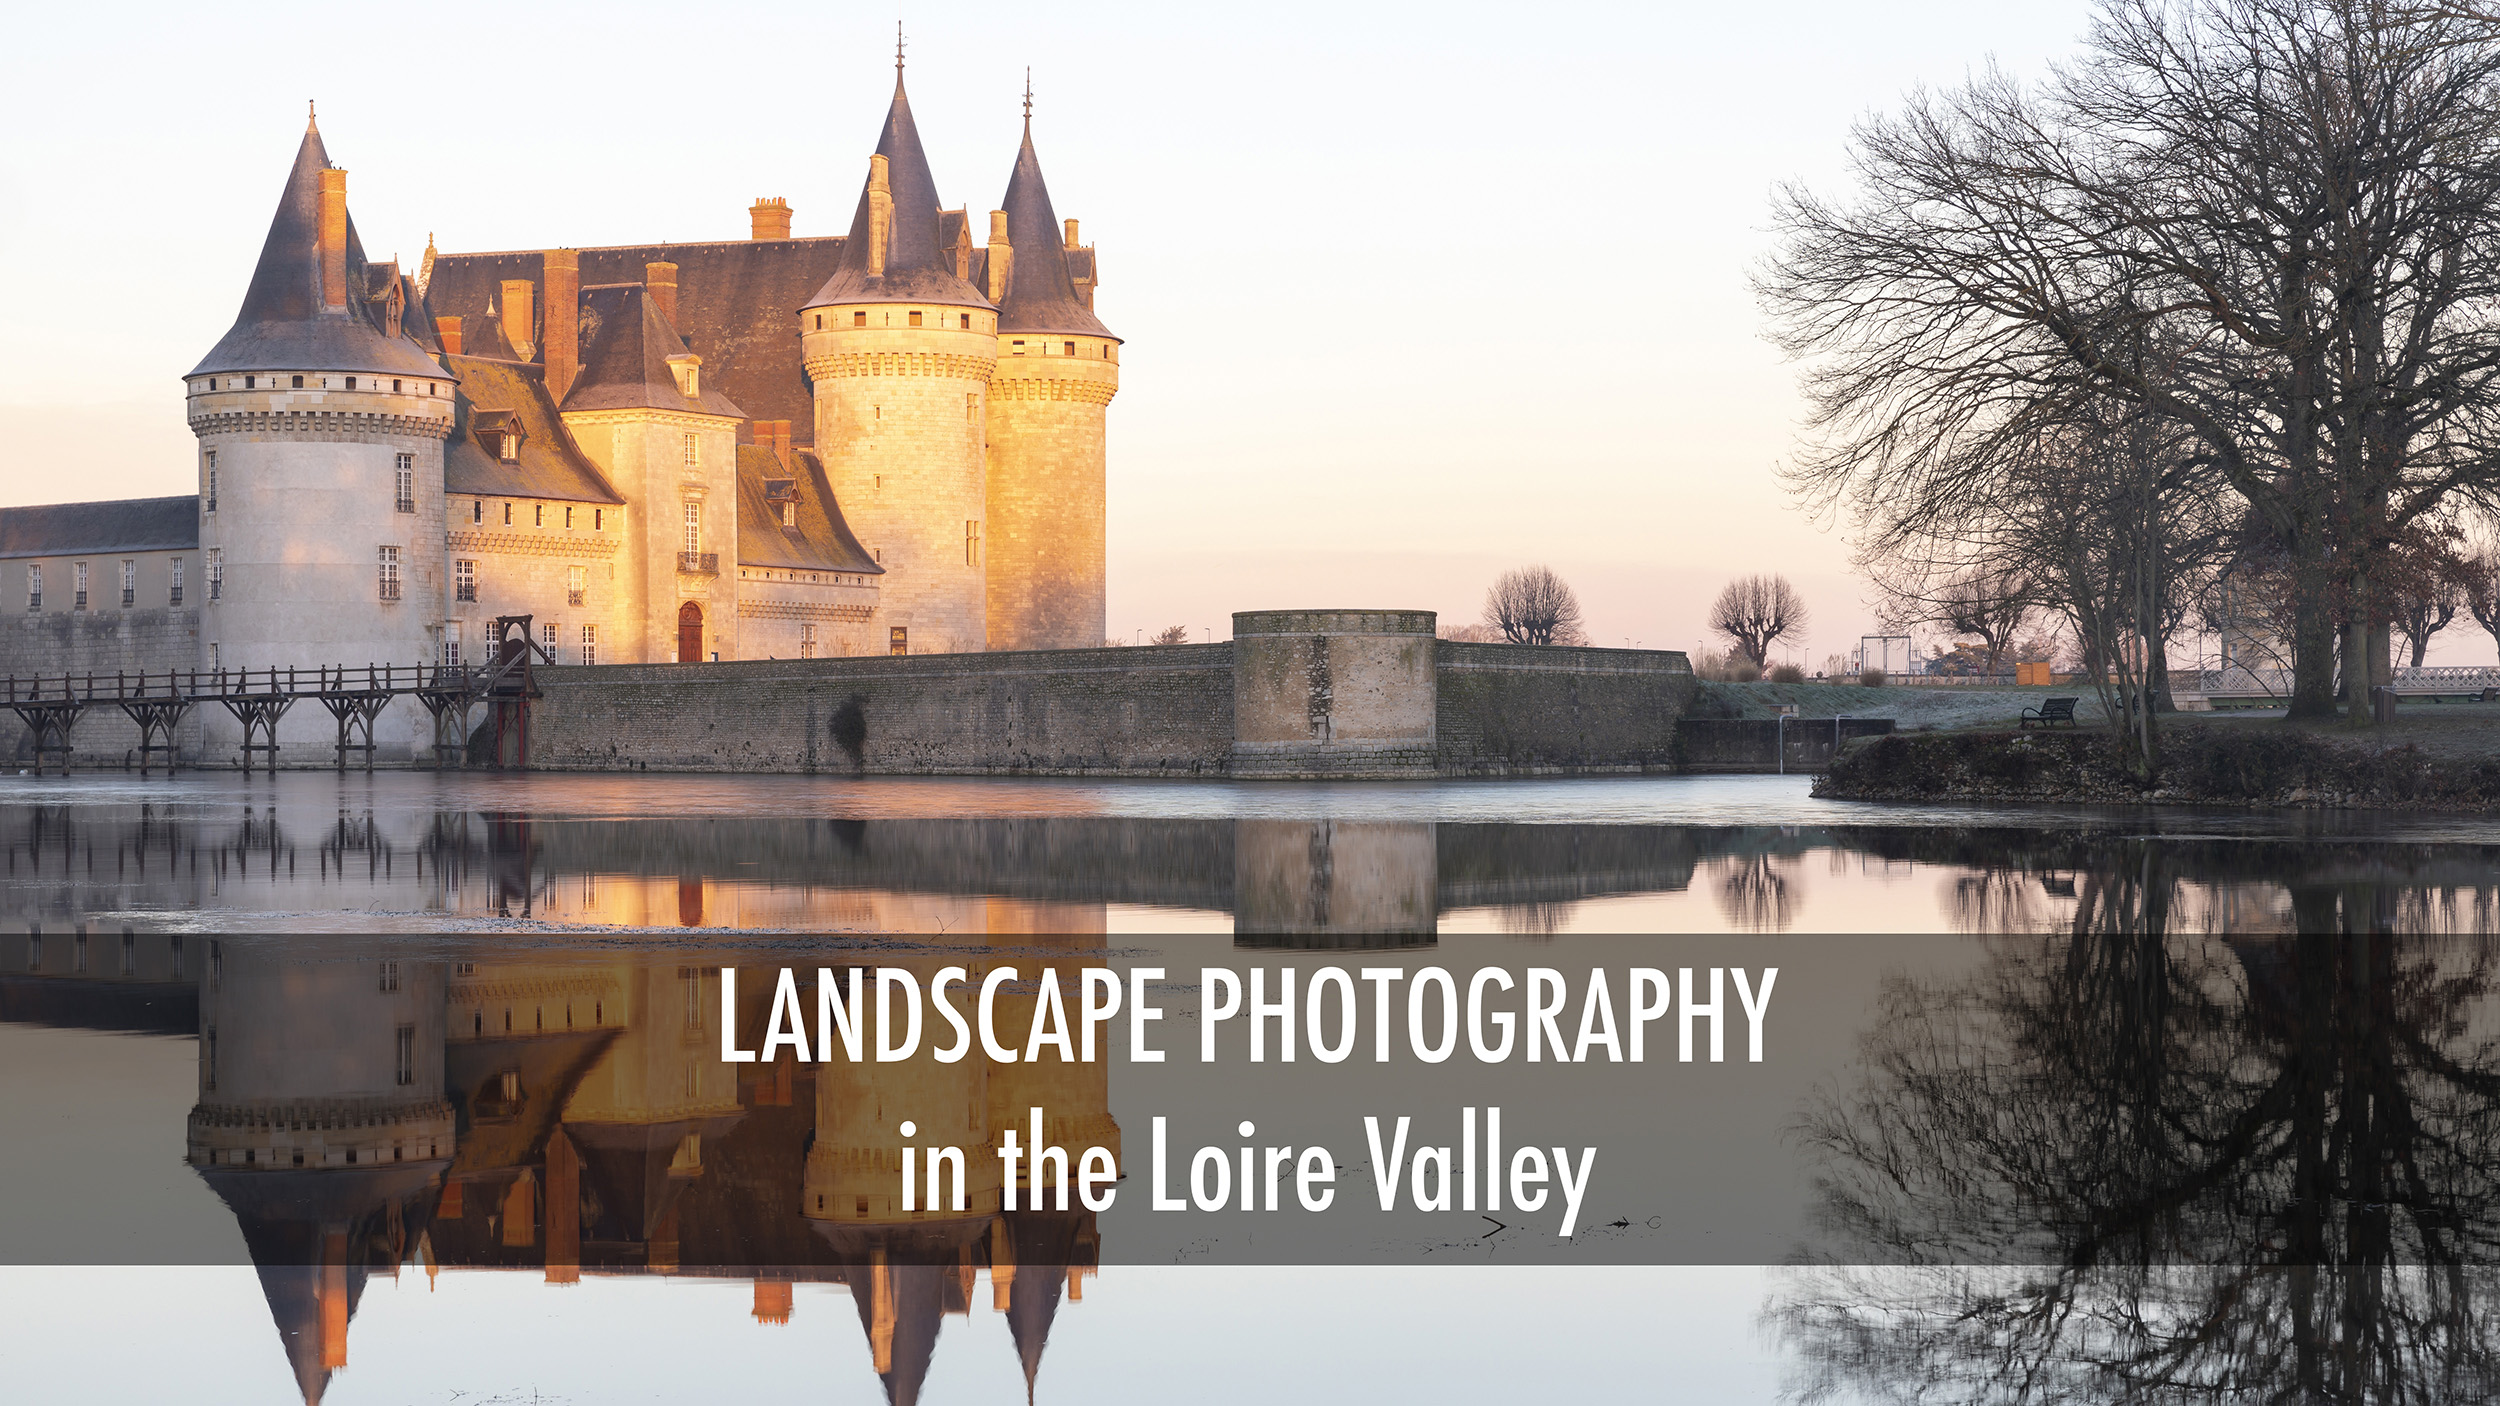 Landscape photography in the Loire Valley of France.